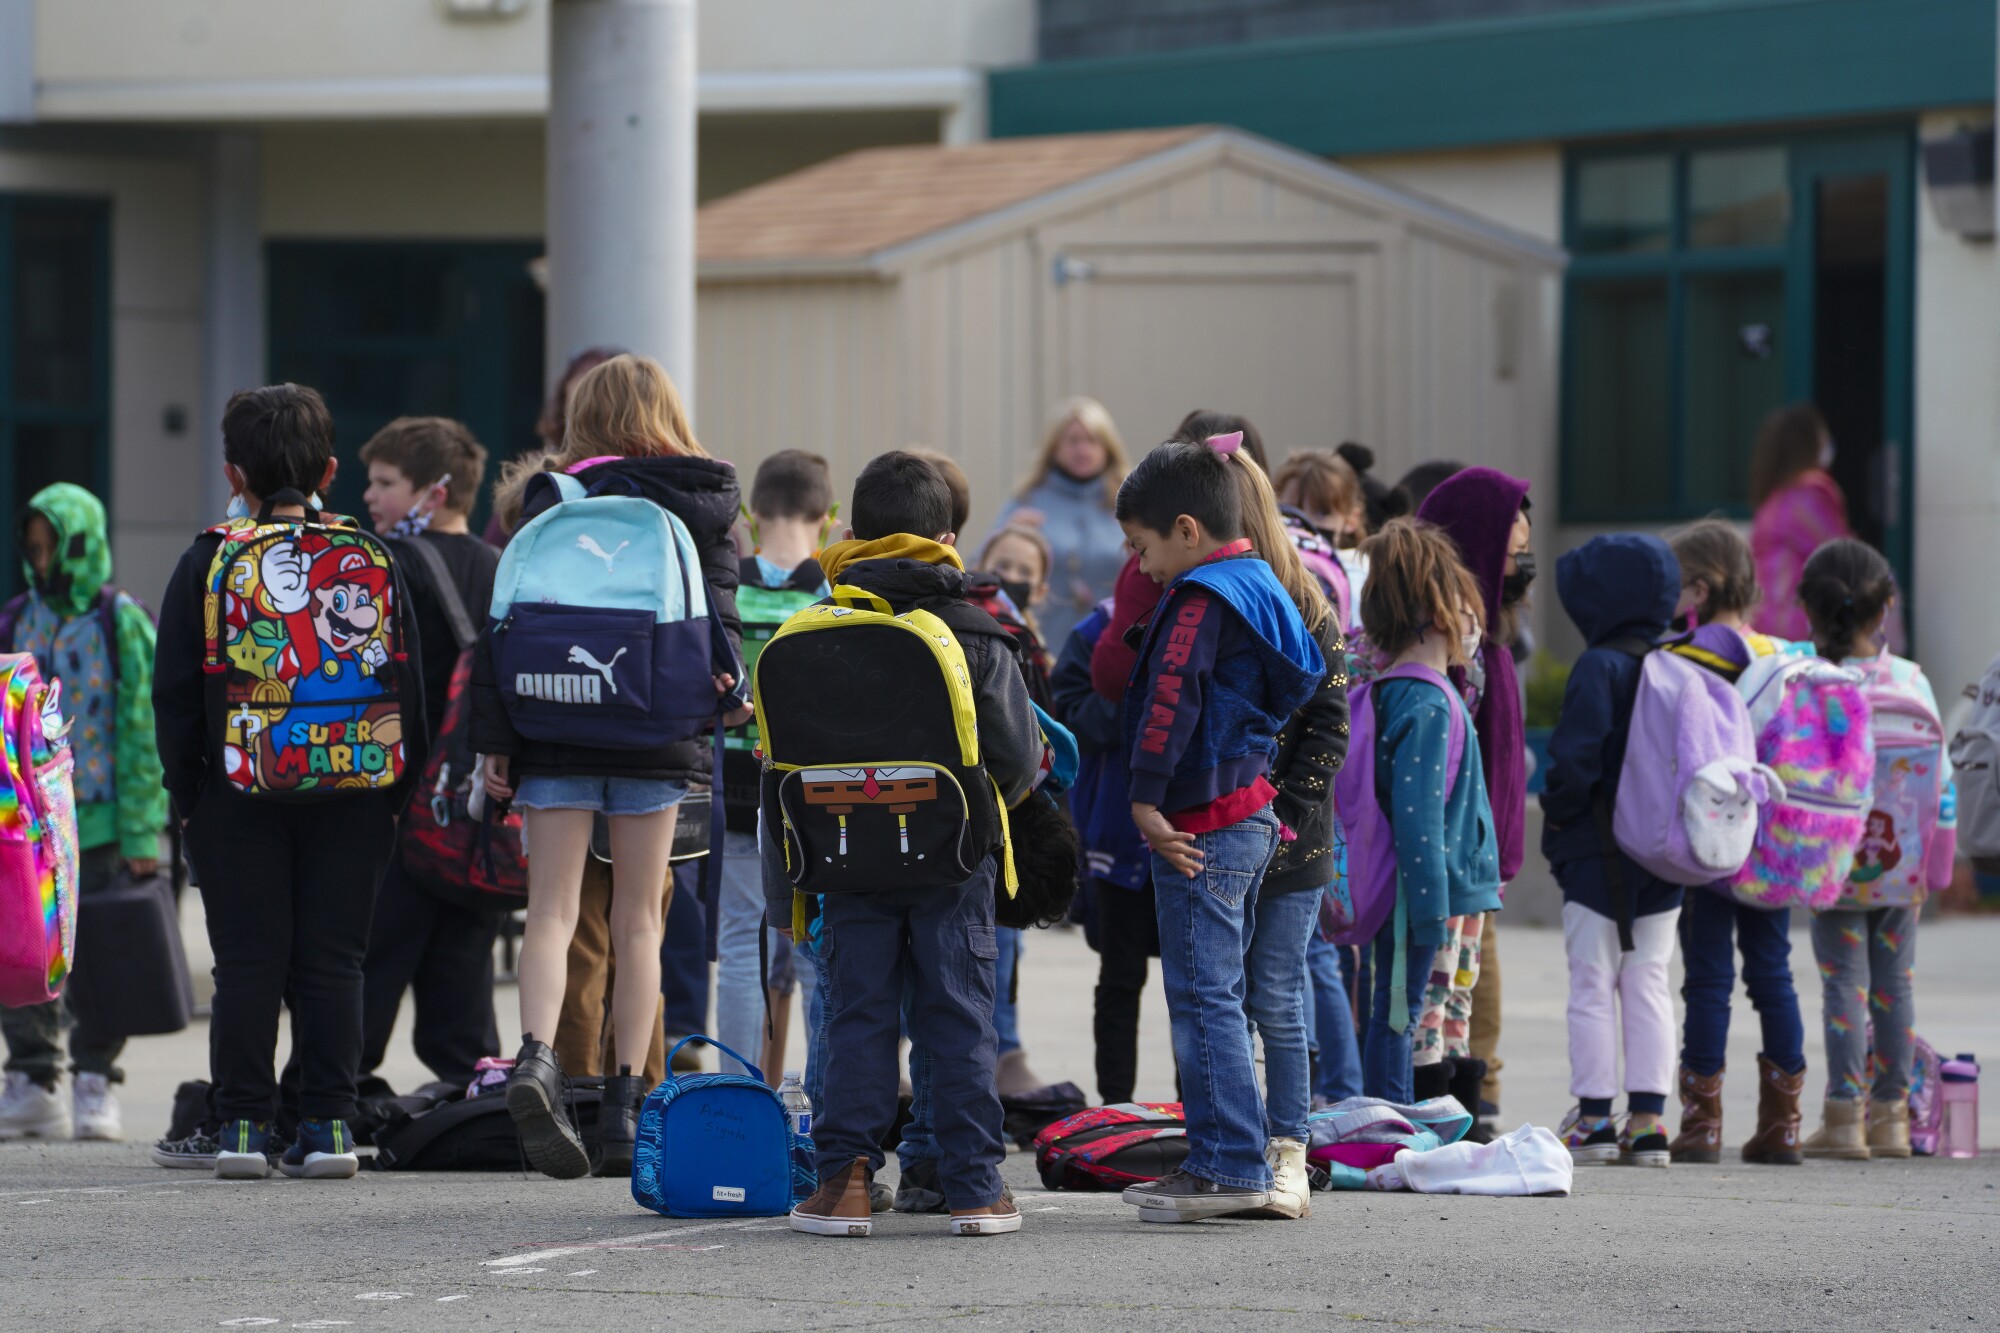 Children line up by assigned classroom for the start of the school day at Campo Elementary School.